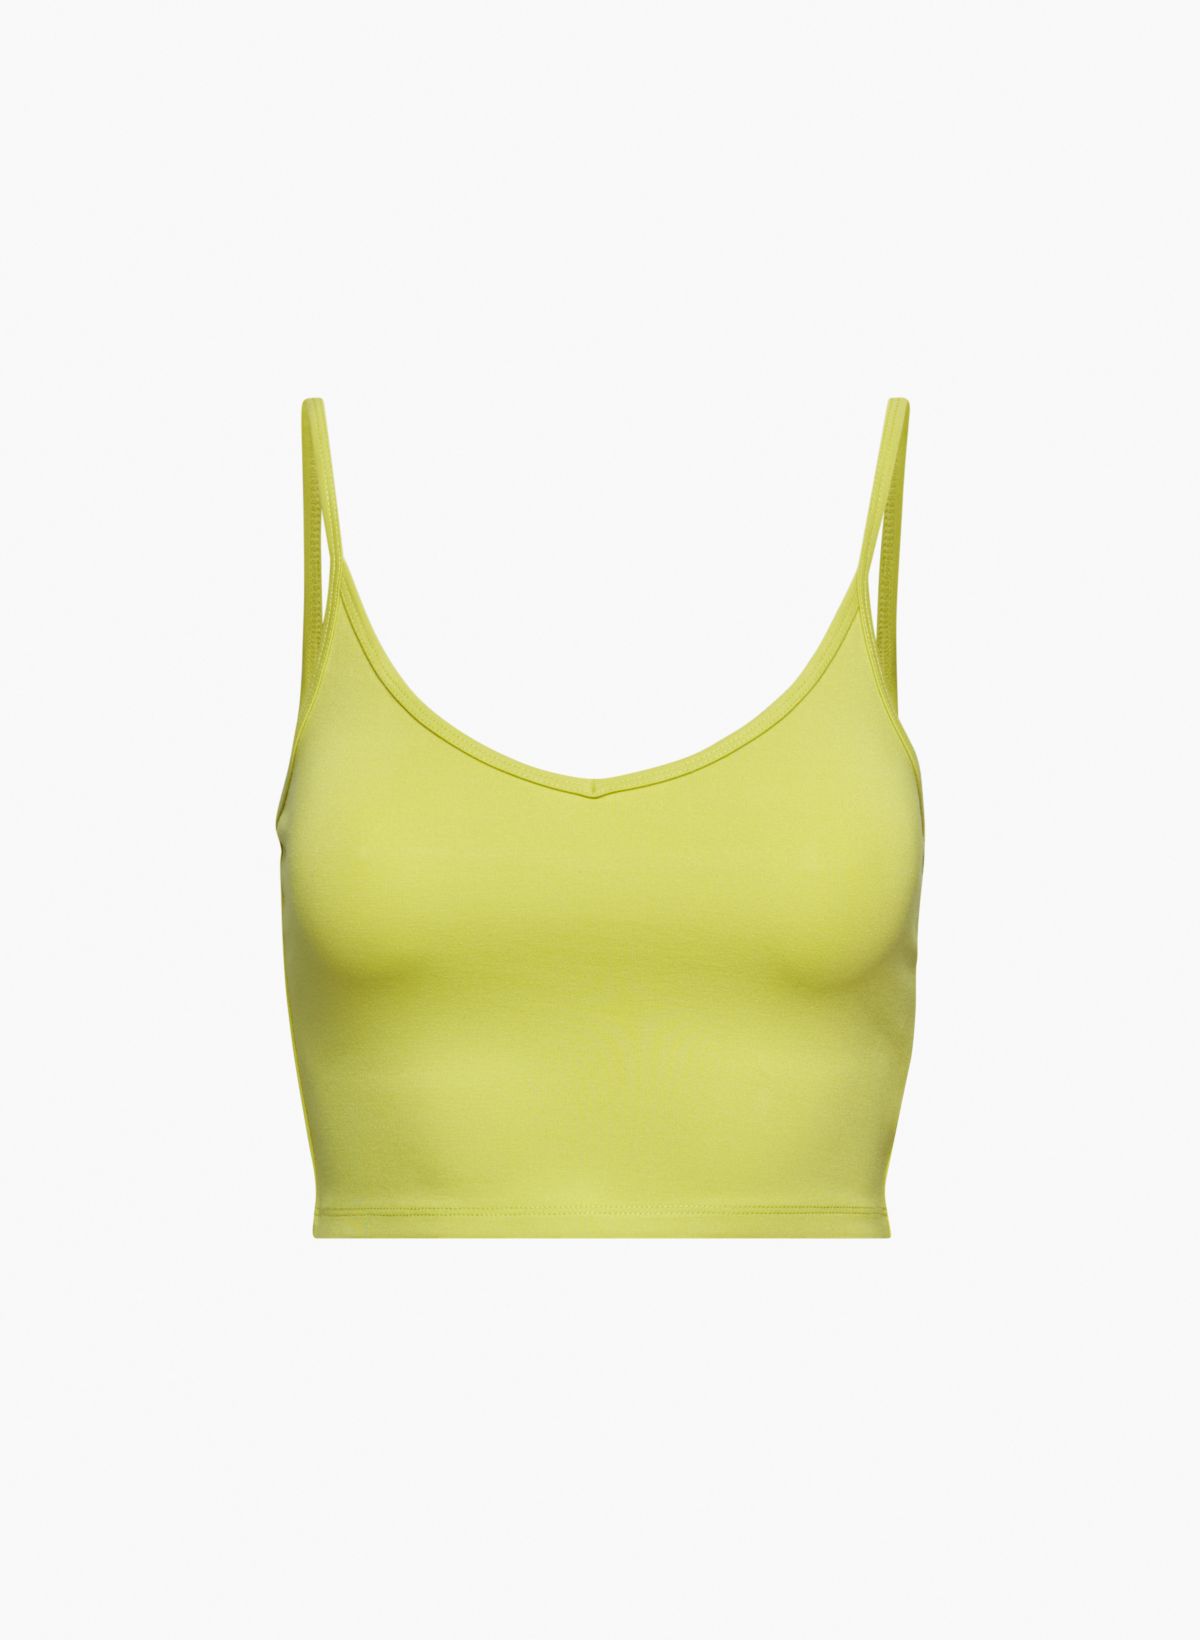 Braless Definition Tank Top -  Canada